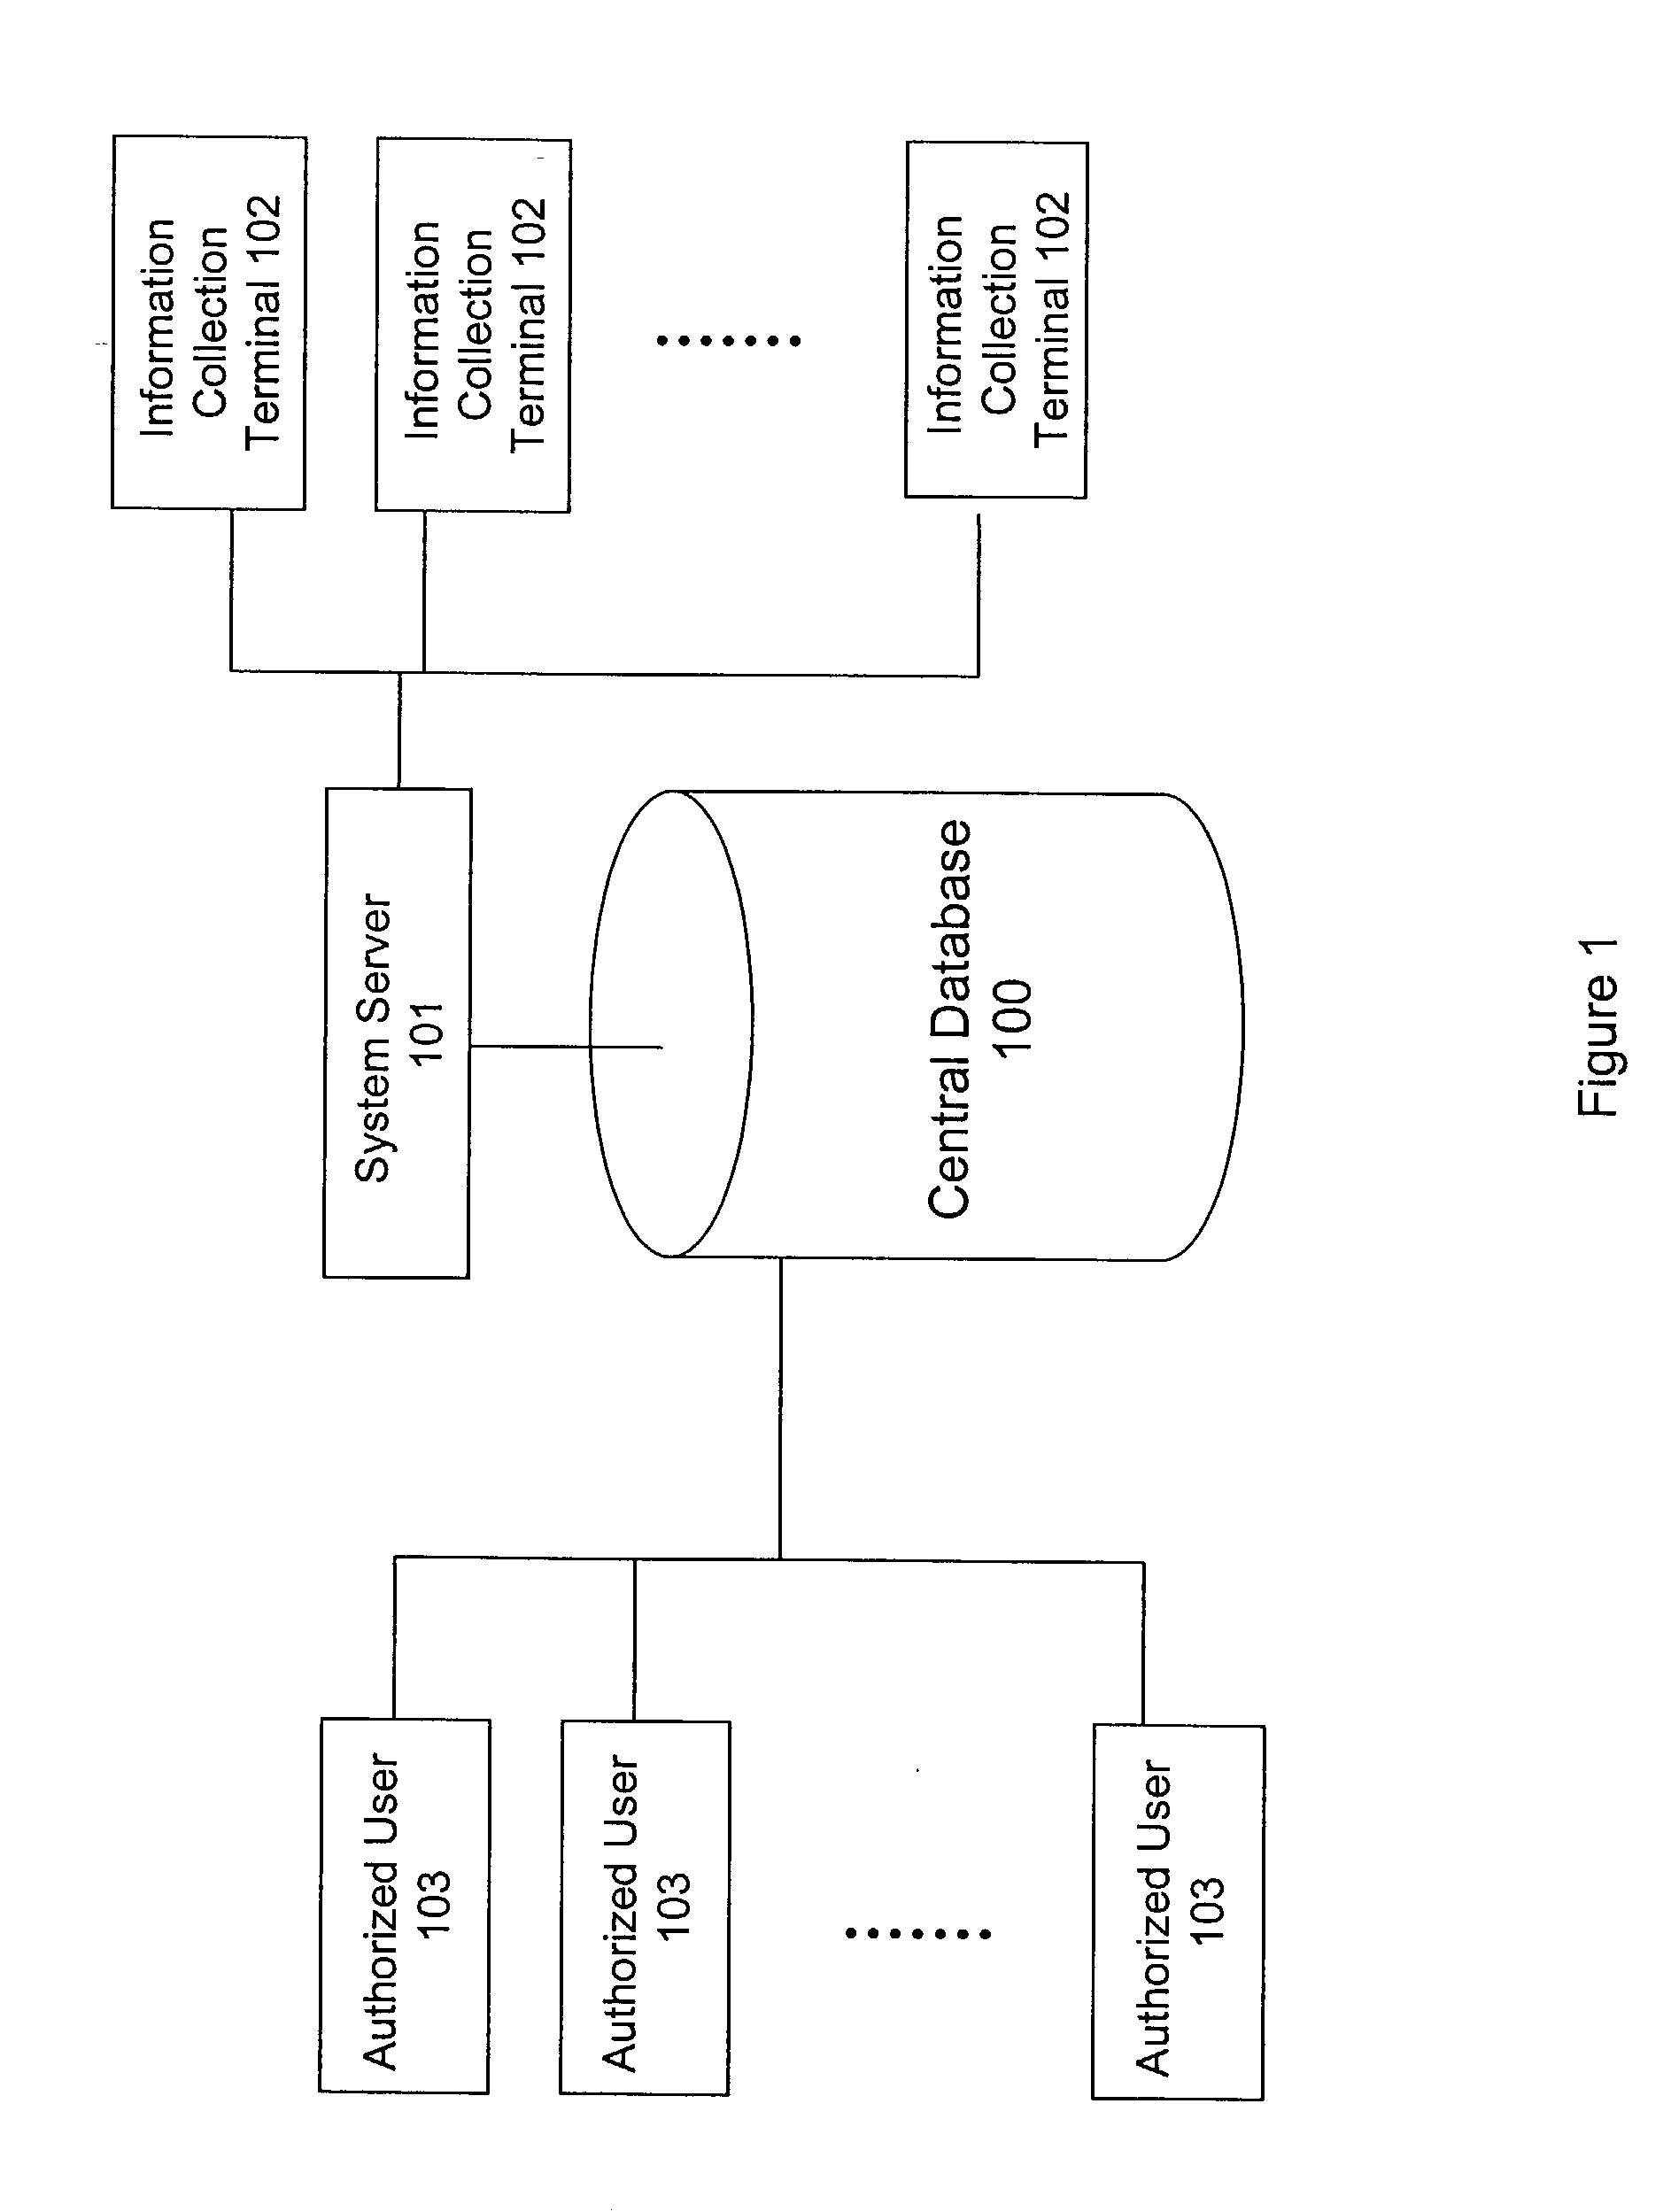 System and method for building and manipulating a centralized measurement value database